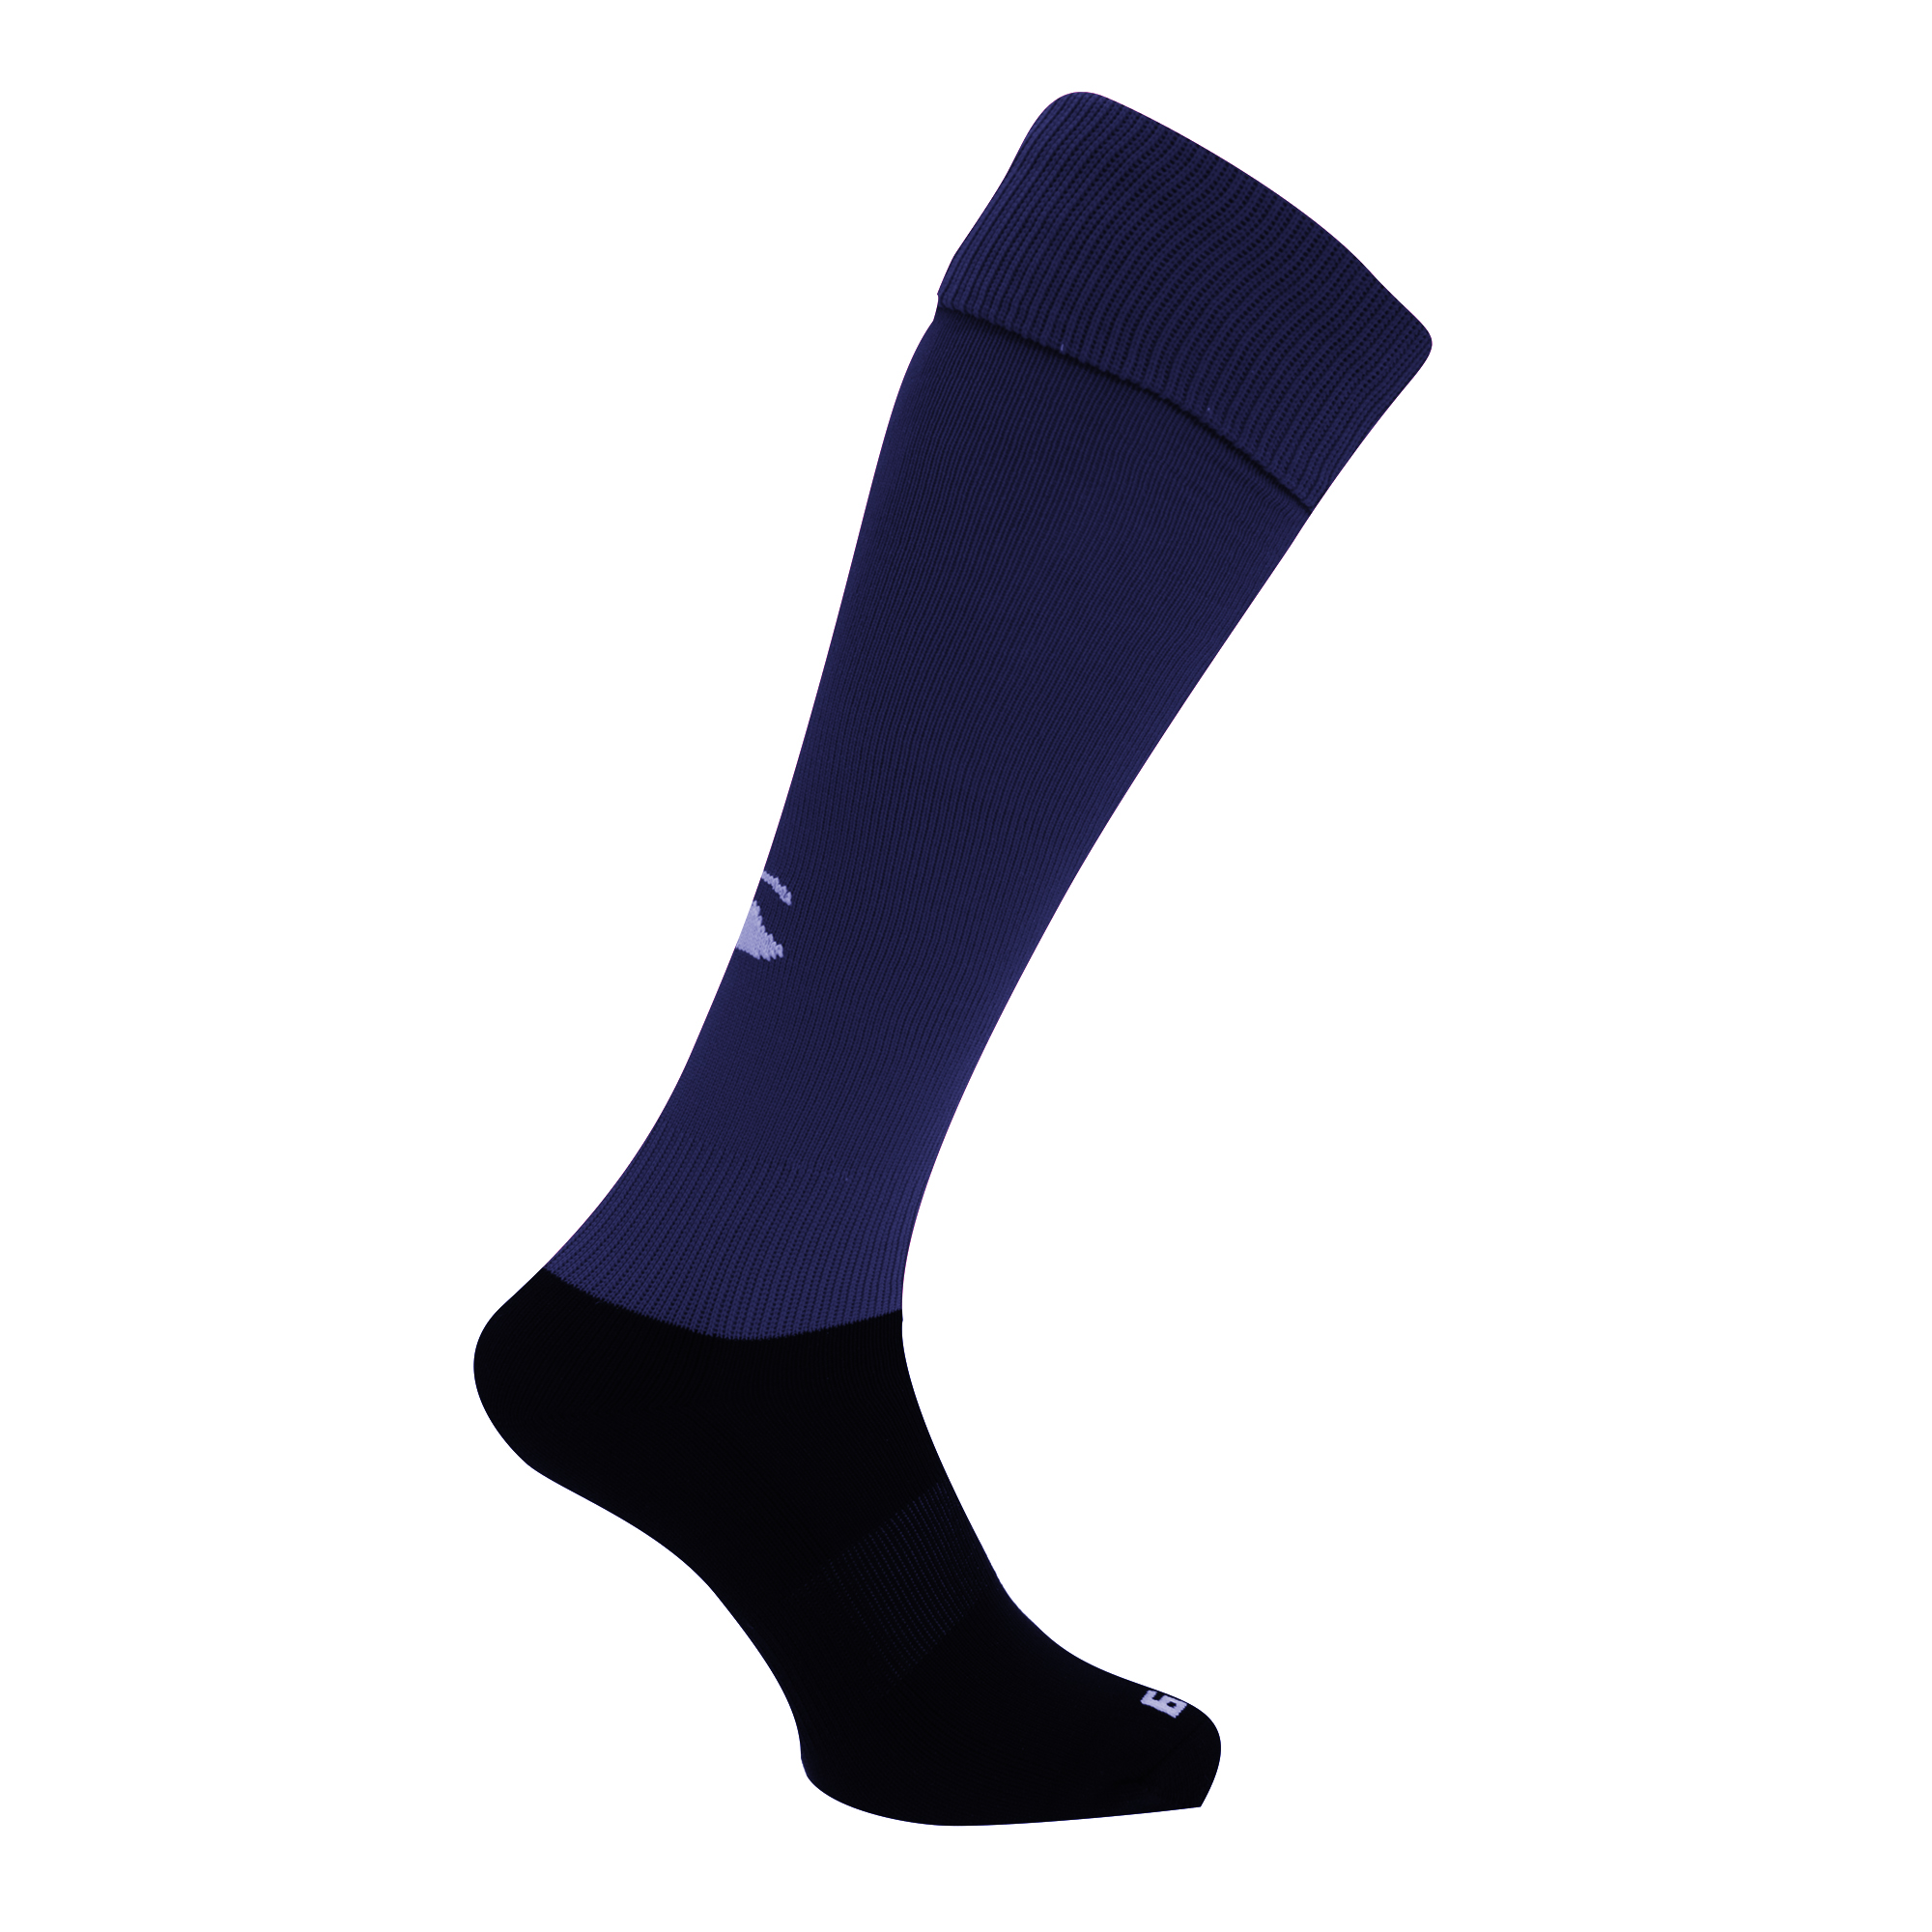 Calcetines de running azules con frase go for it – Diversocks